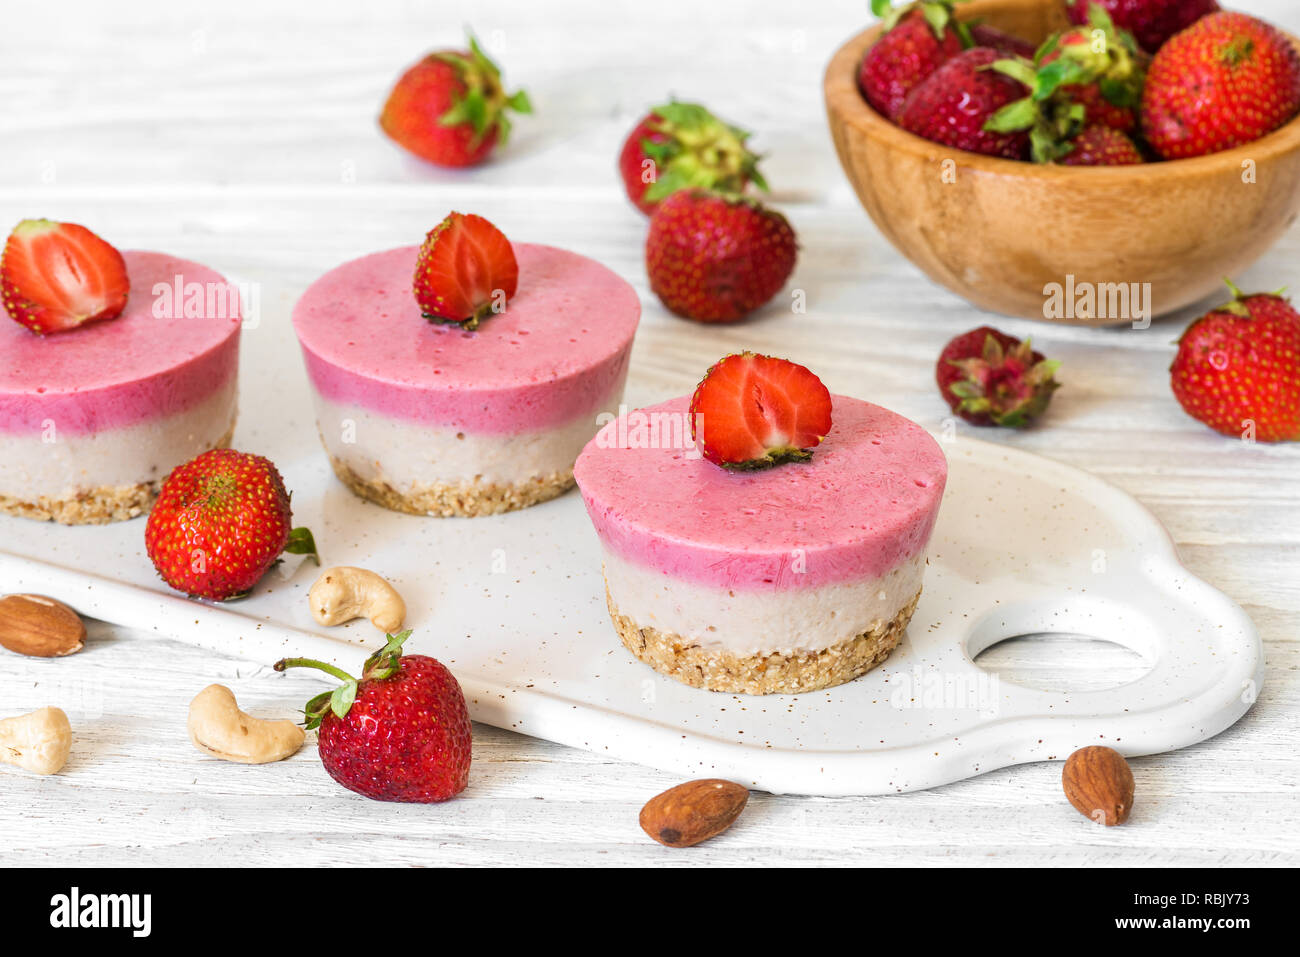 vegan raw strawberry and banana cakes with fresh berries and nuts. healthy delicious food Stock Photo